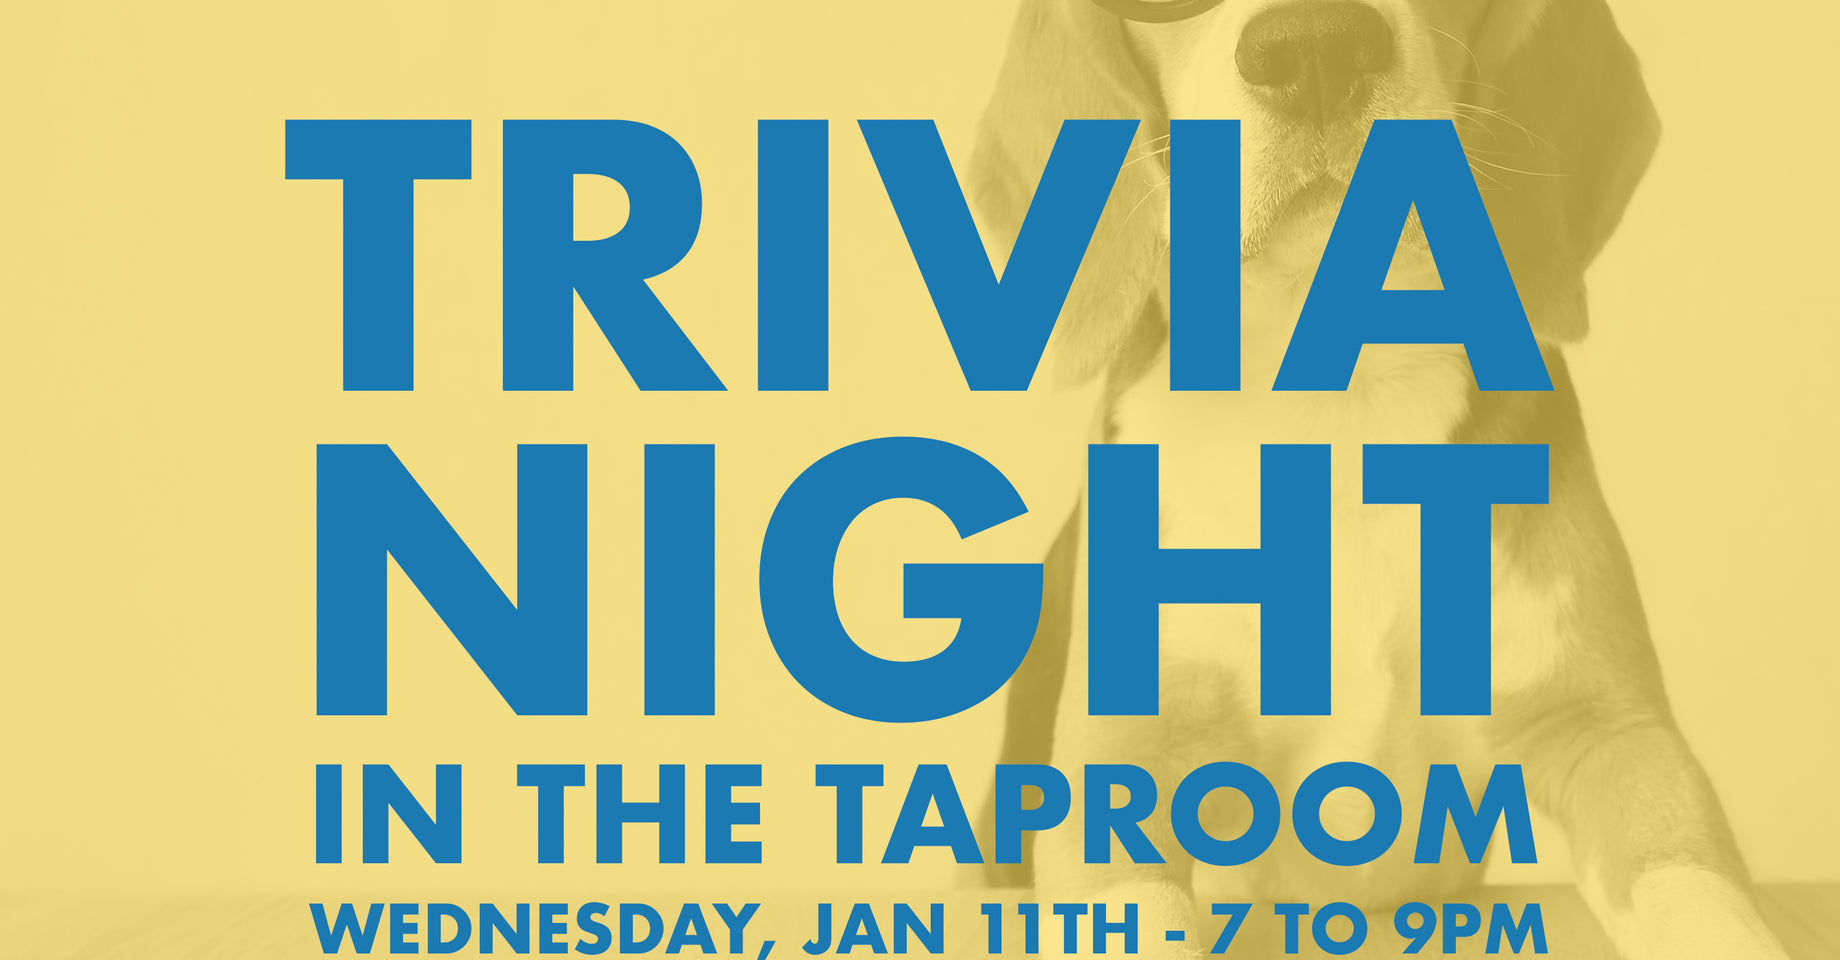 Trivia Night at the brewery!